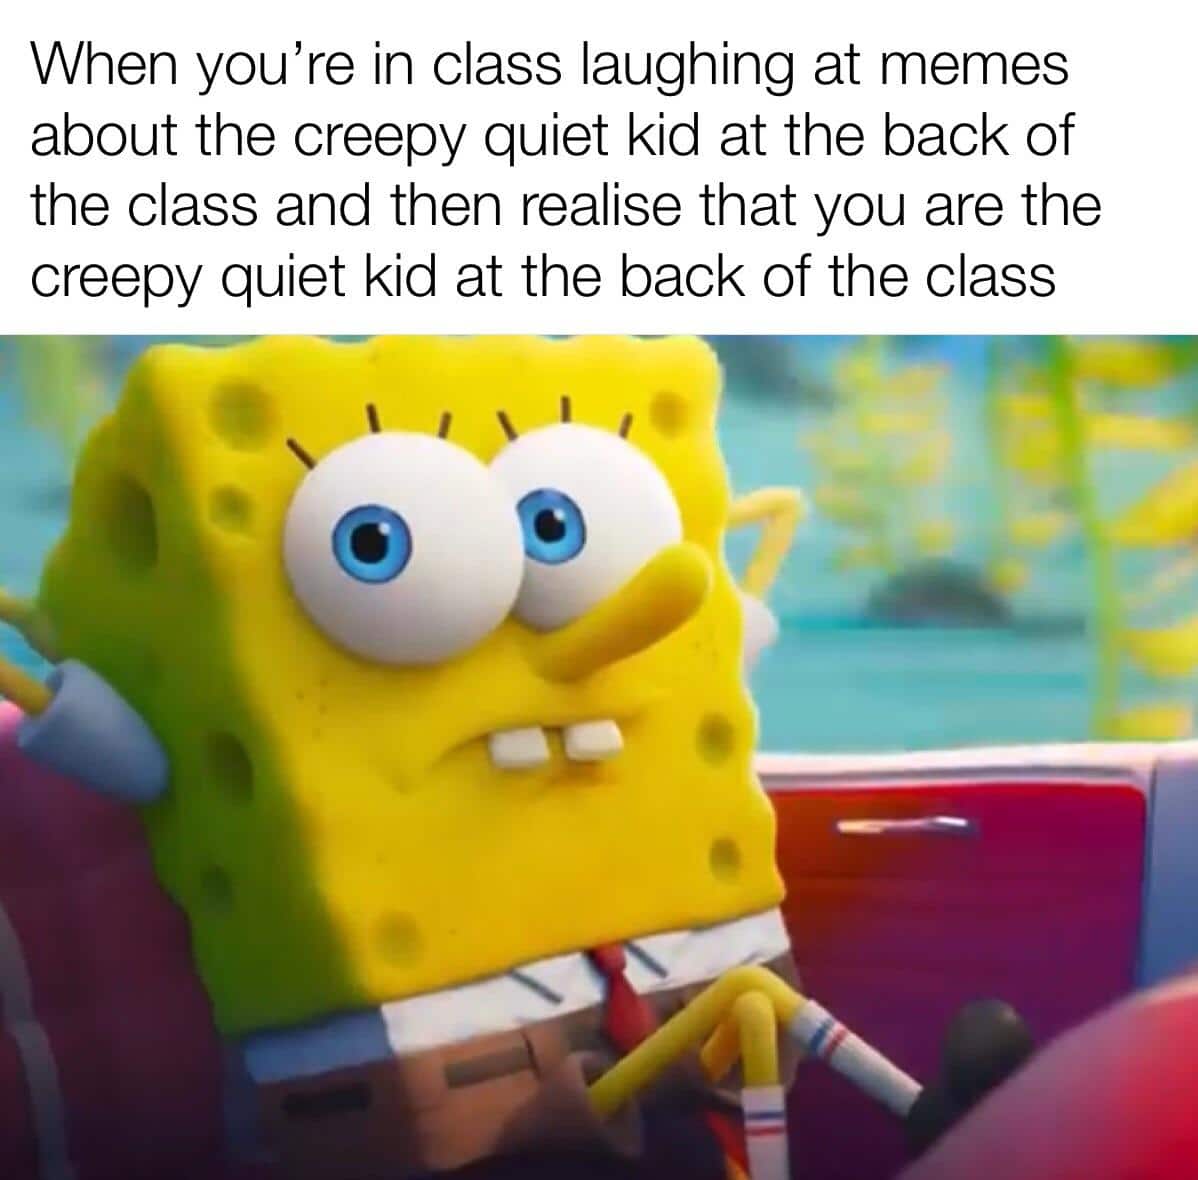 spongebob spongebob-memes spongebob text: When you're in class laughing at memes about the creepy quiet kid at the back of the class and then realise that you are the creepy quiet kid at the back of the class 